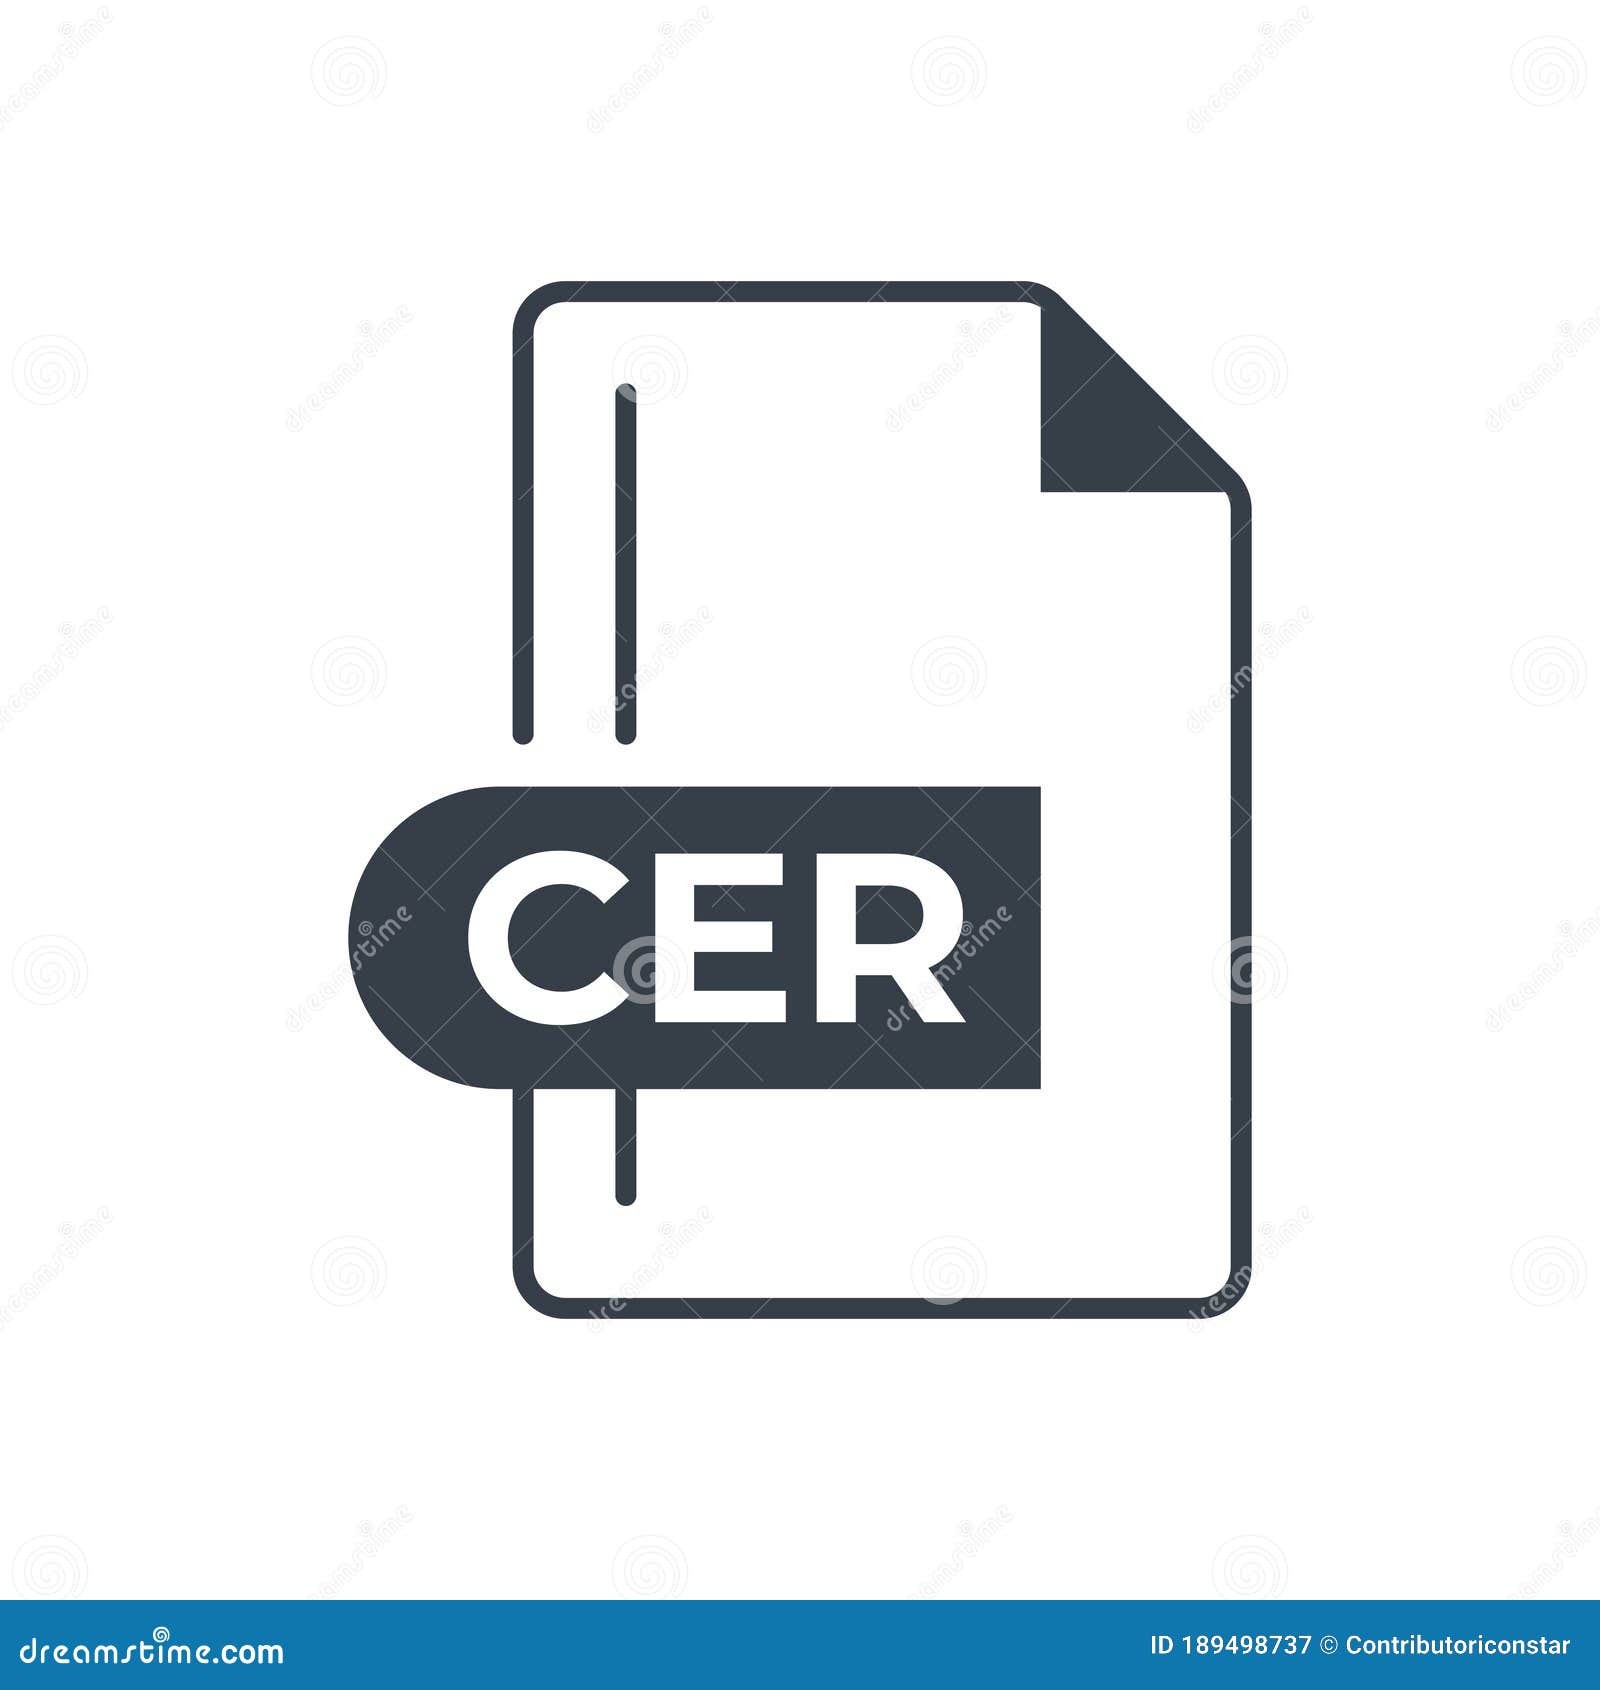 cer file format icon. cer extension filled icon